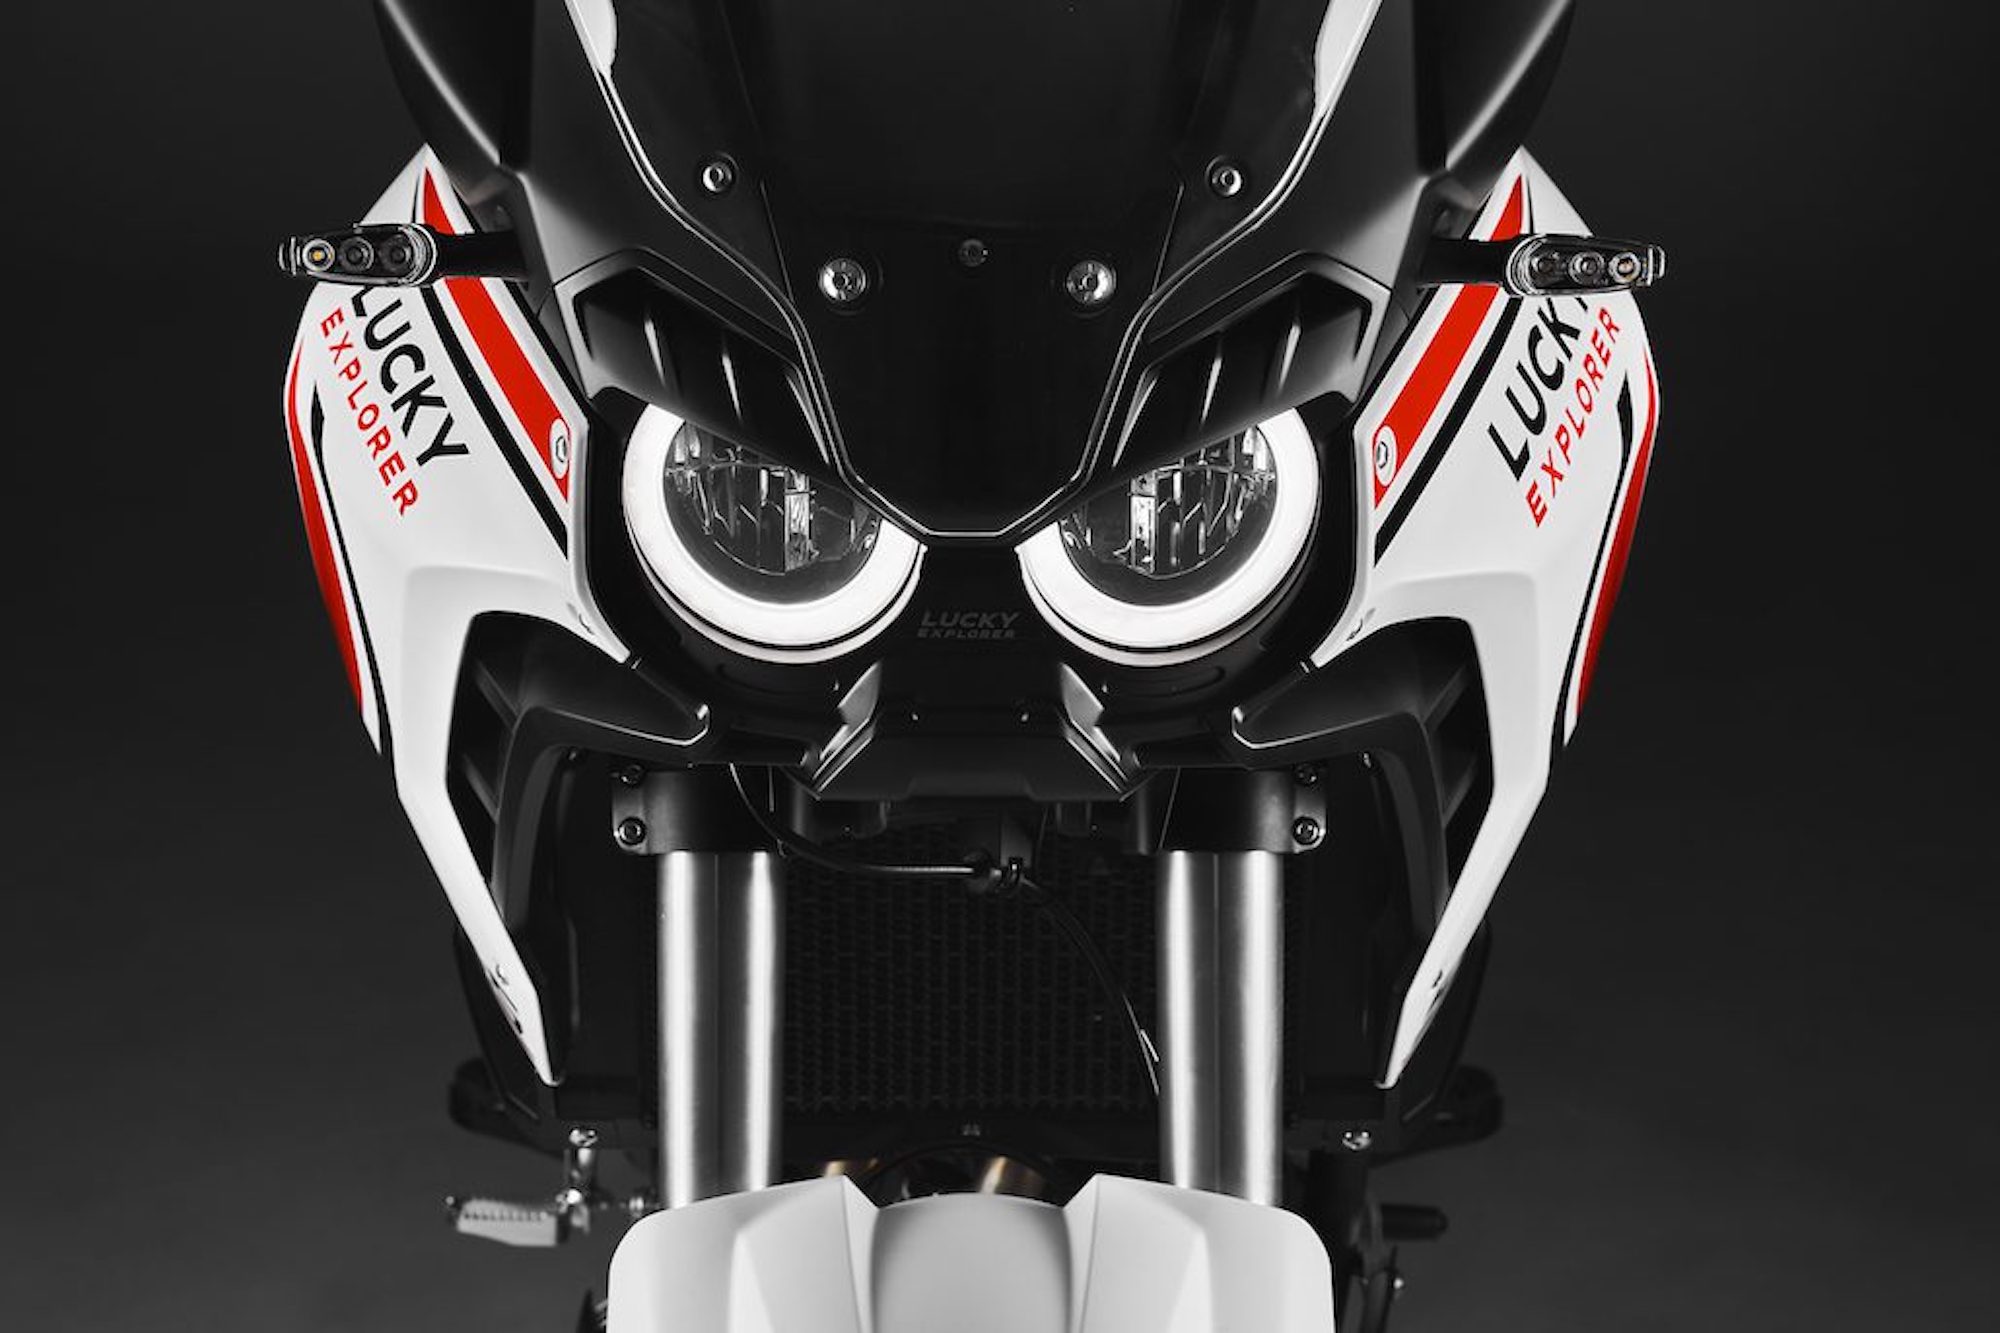 A view of MV Agusta's Lucky Explorer 9.5, which has been rebranded to "Enduro Veloce." Media sourced from Gear Junkie.